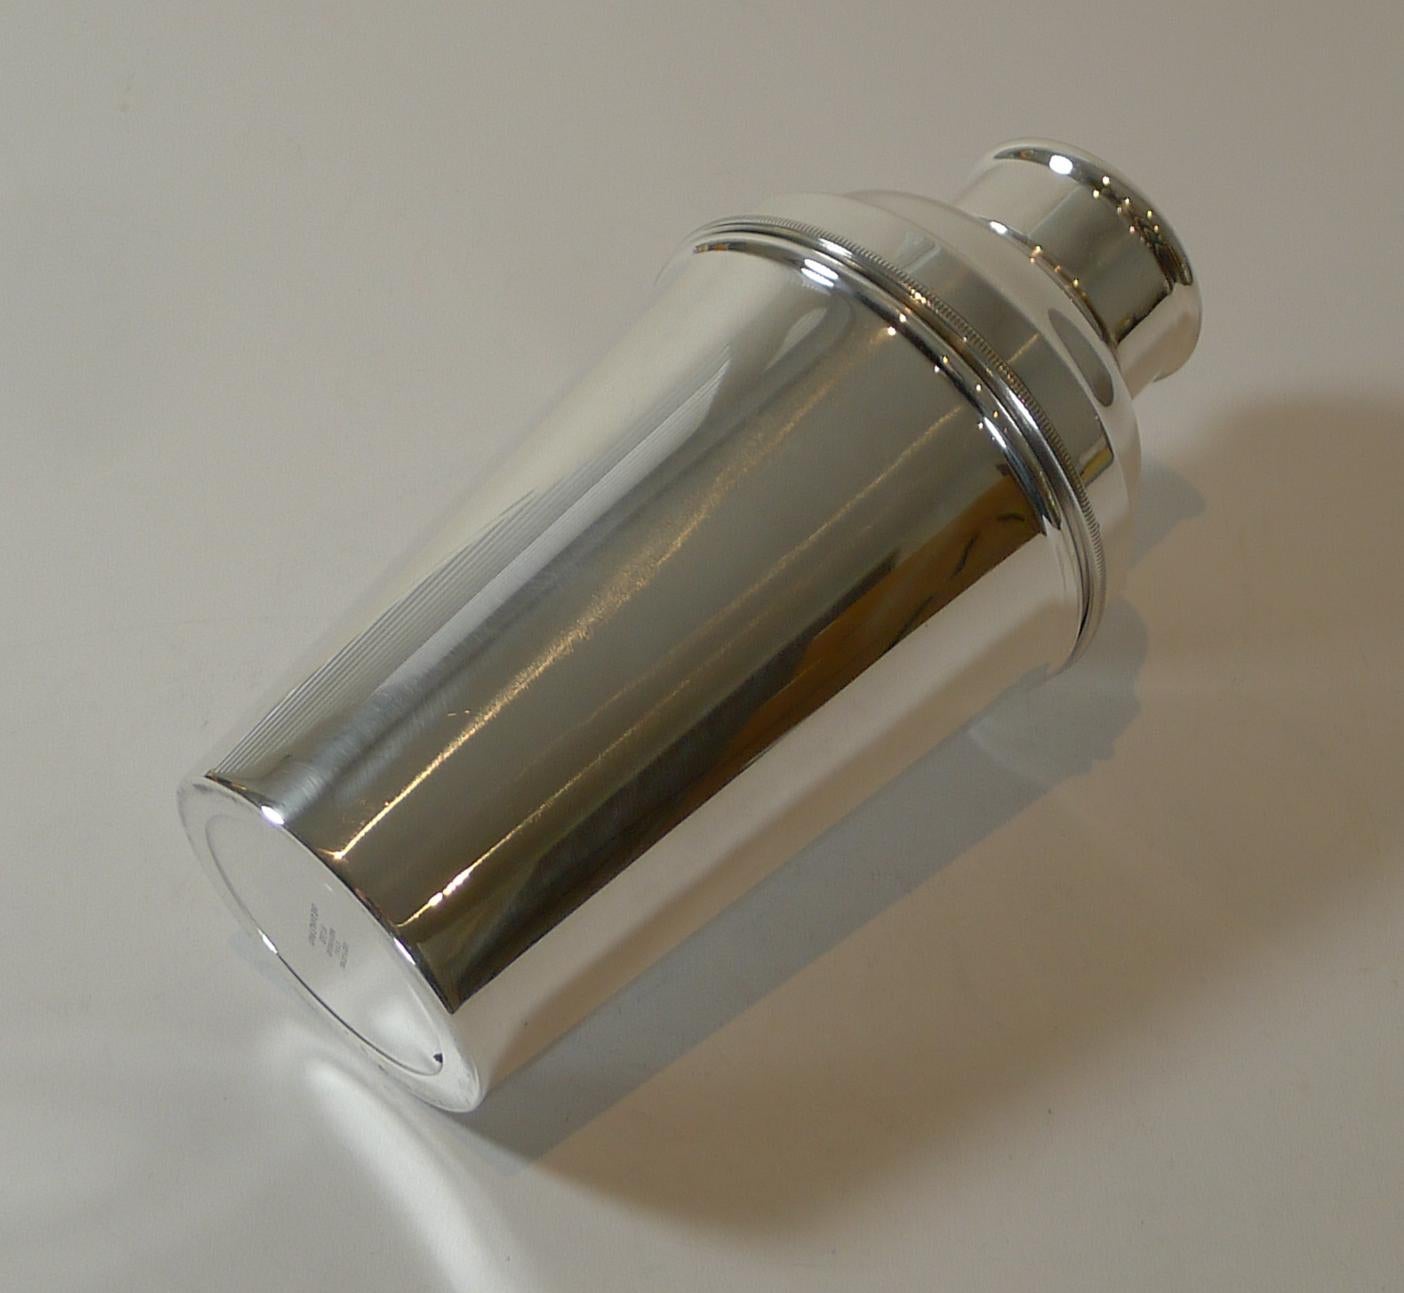 Mid-20th Century Large 1 1/2 Pint Silver Plated Cocktail Shaker by Suckling Ltd. c.1930